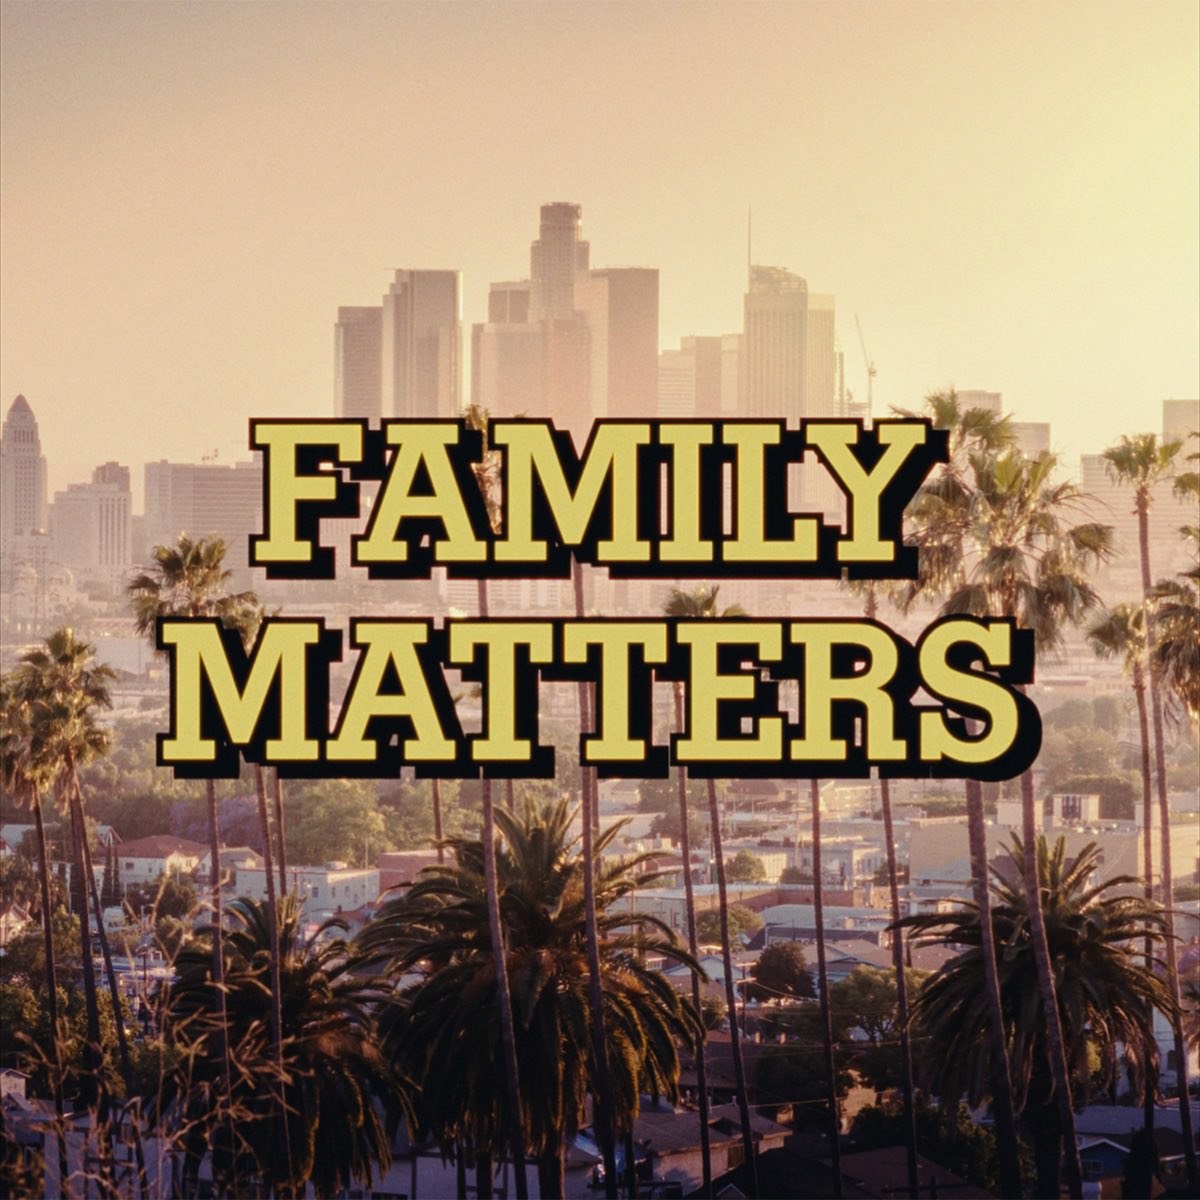 Drake’s “Family Matters” is now aiming for a top 5 debut on the Billboard Hot 100.